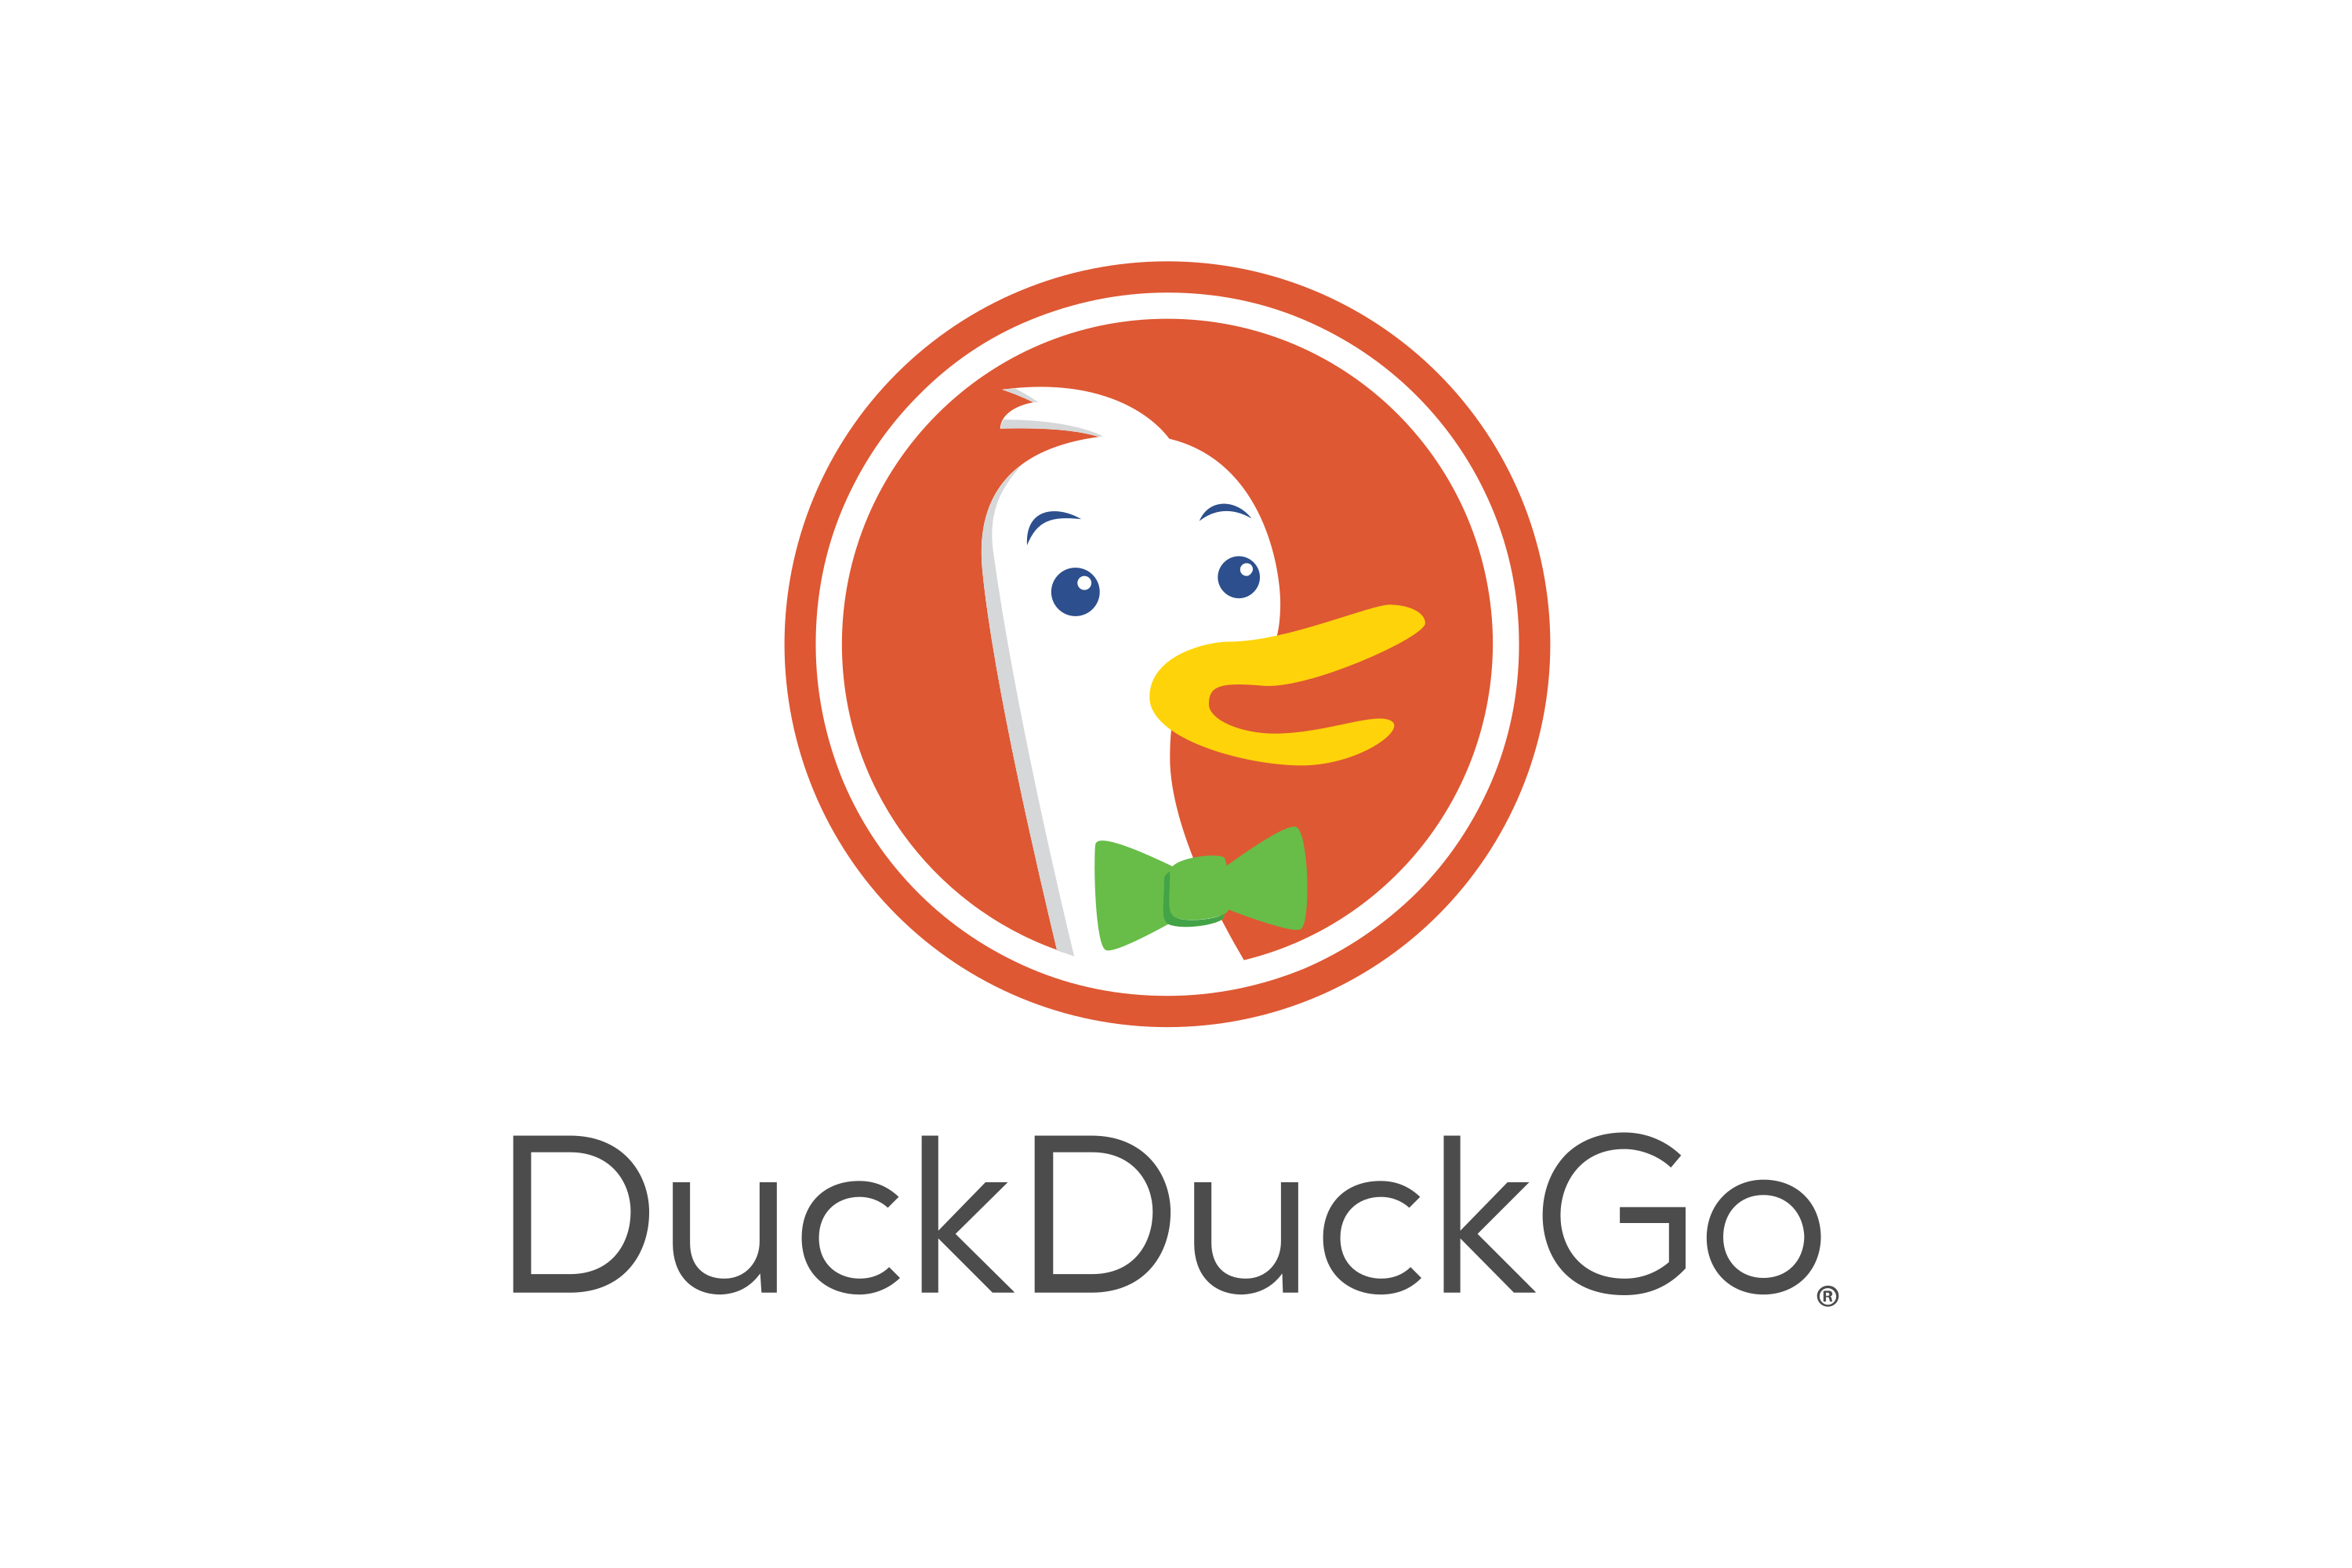 DuckDuckGo is a privacy respecting search engine.